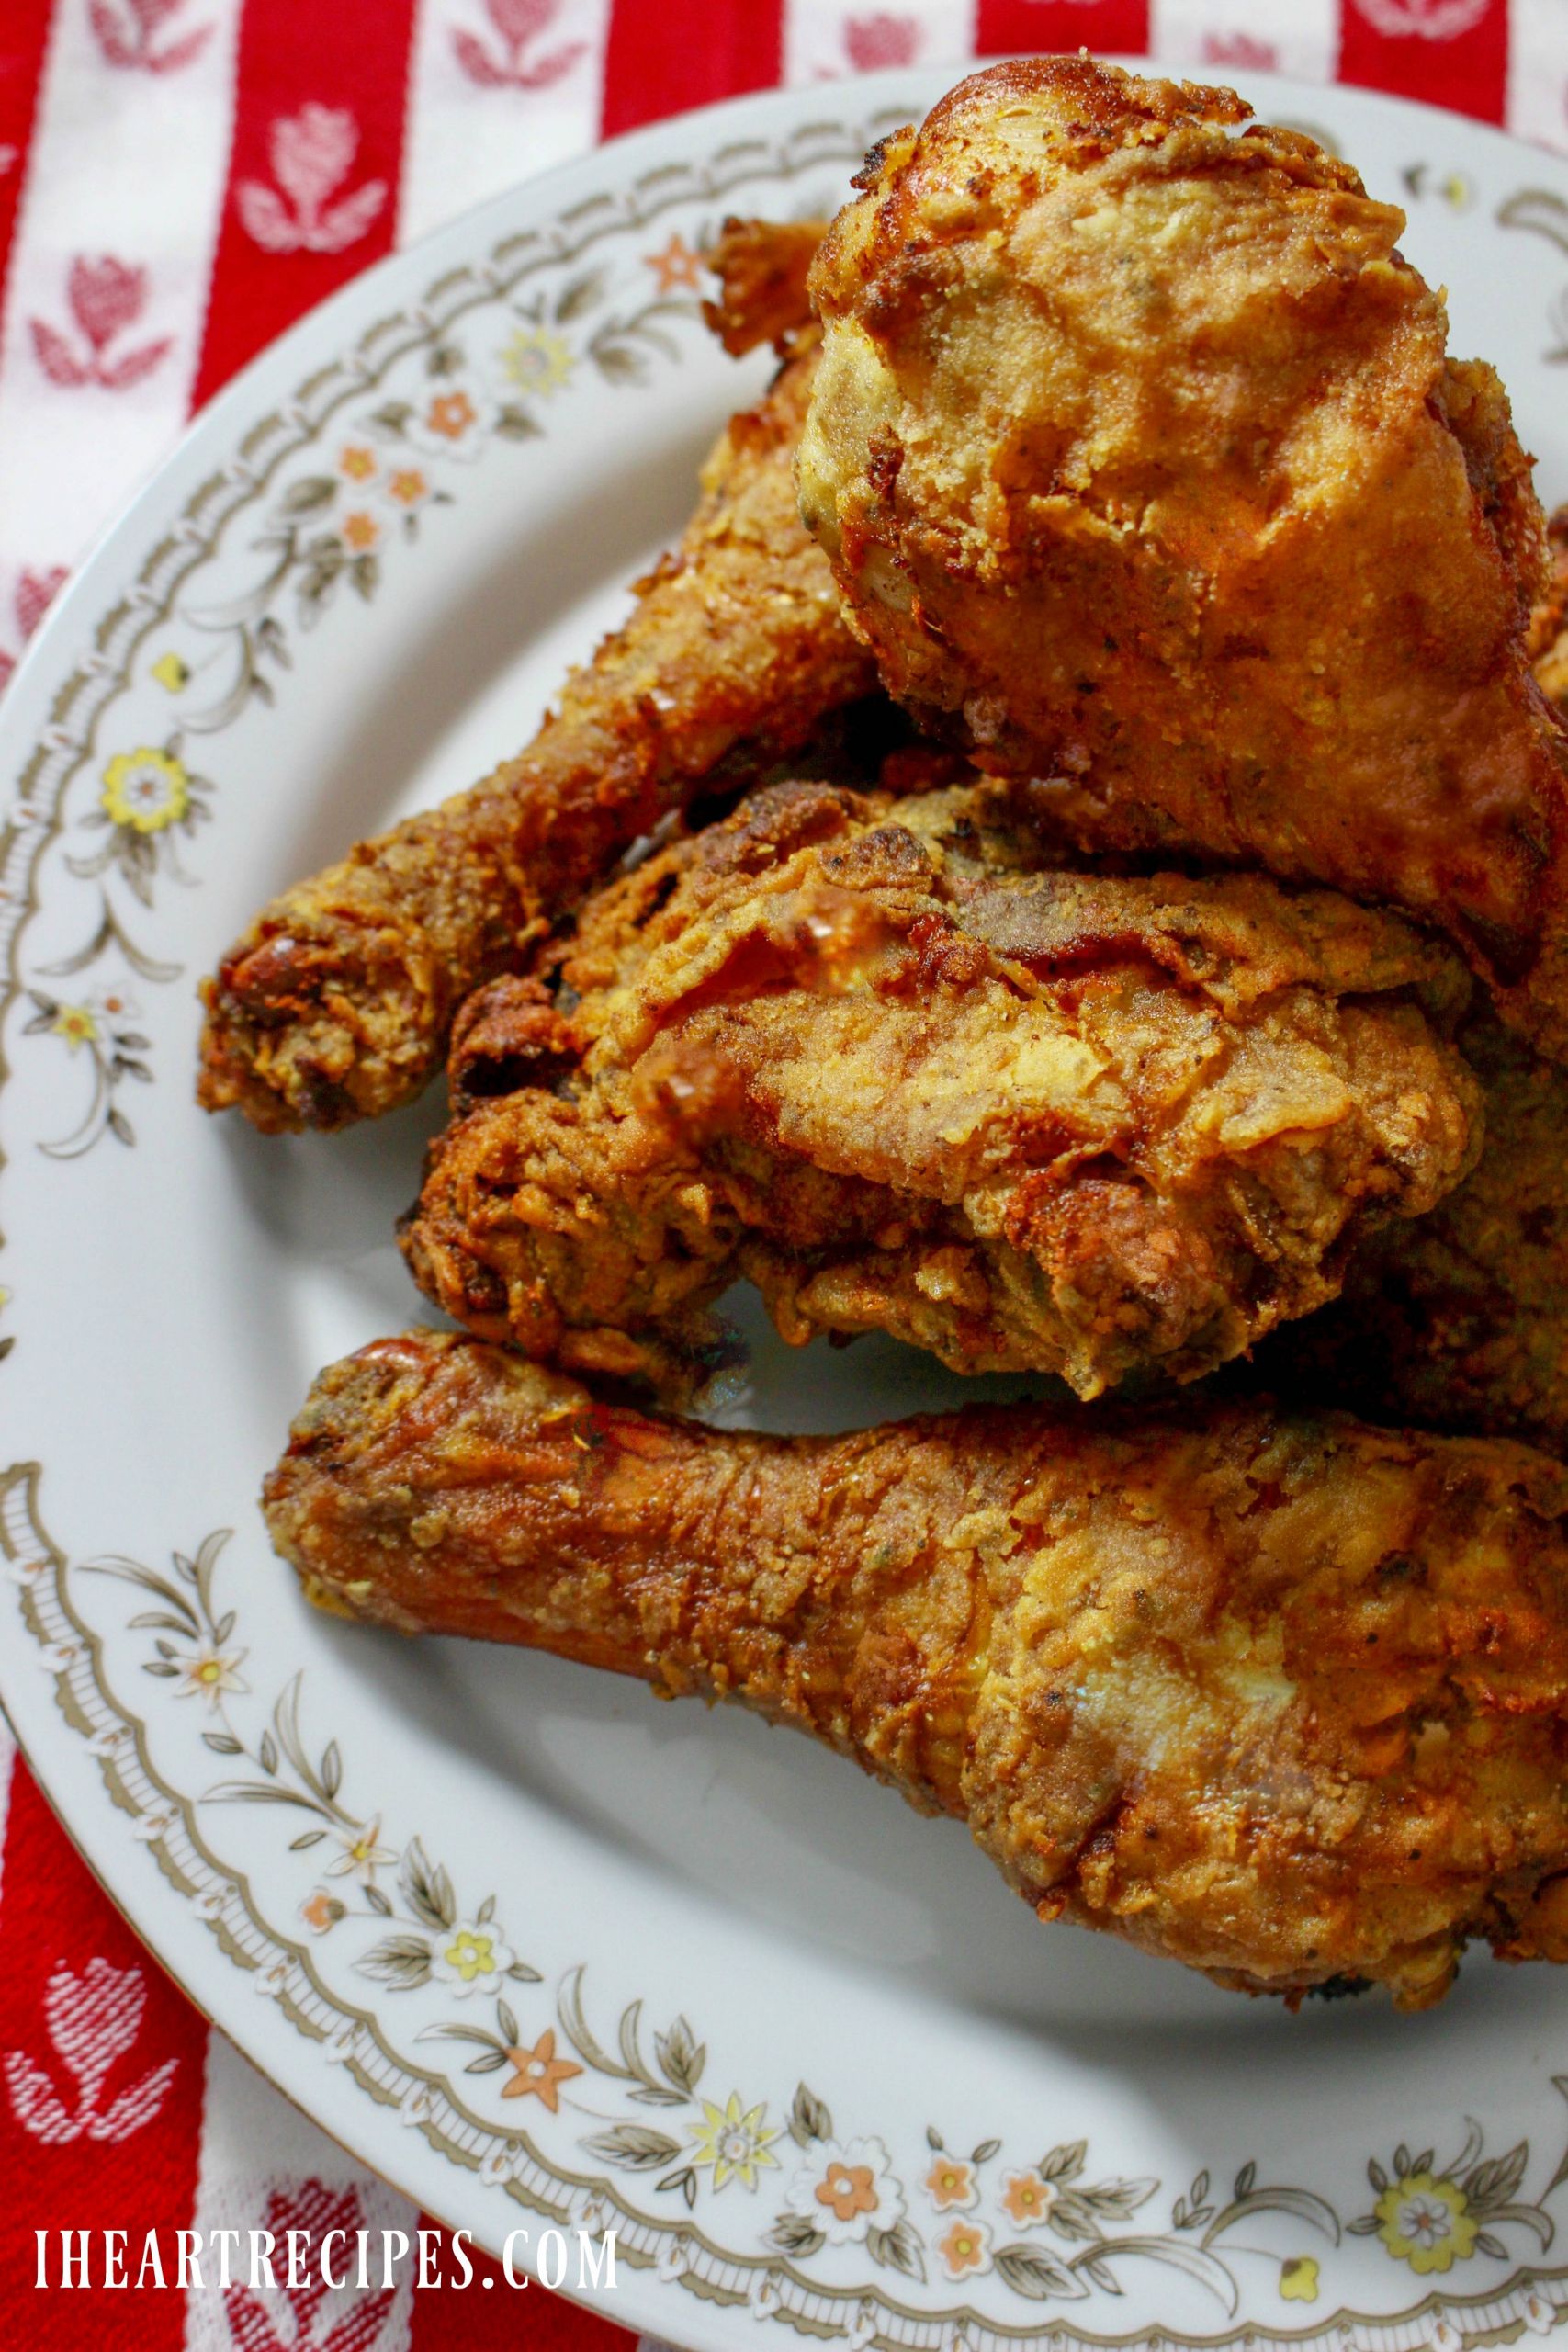 Fried Chicken Recipe Without Buttermilk
 fried chicken without buttermilk or eggs